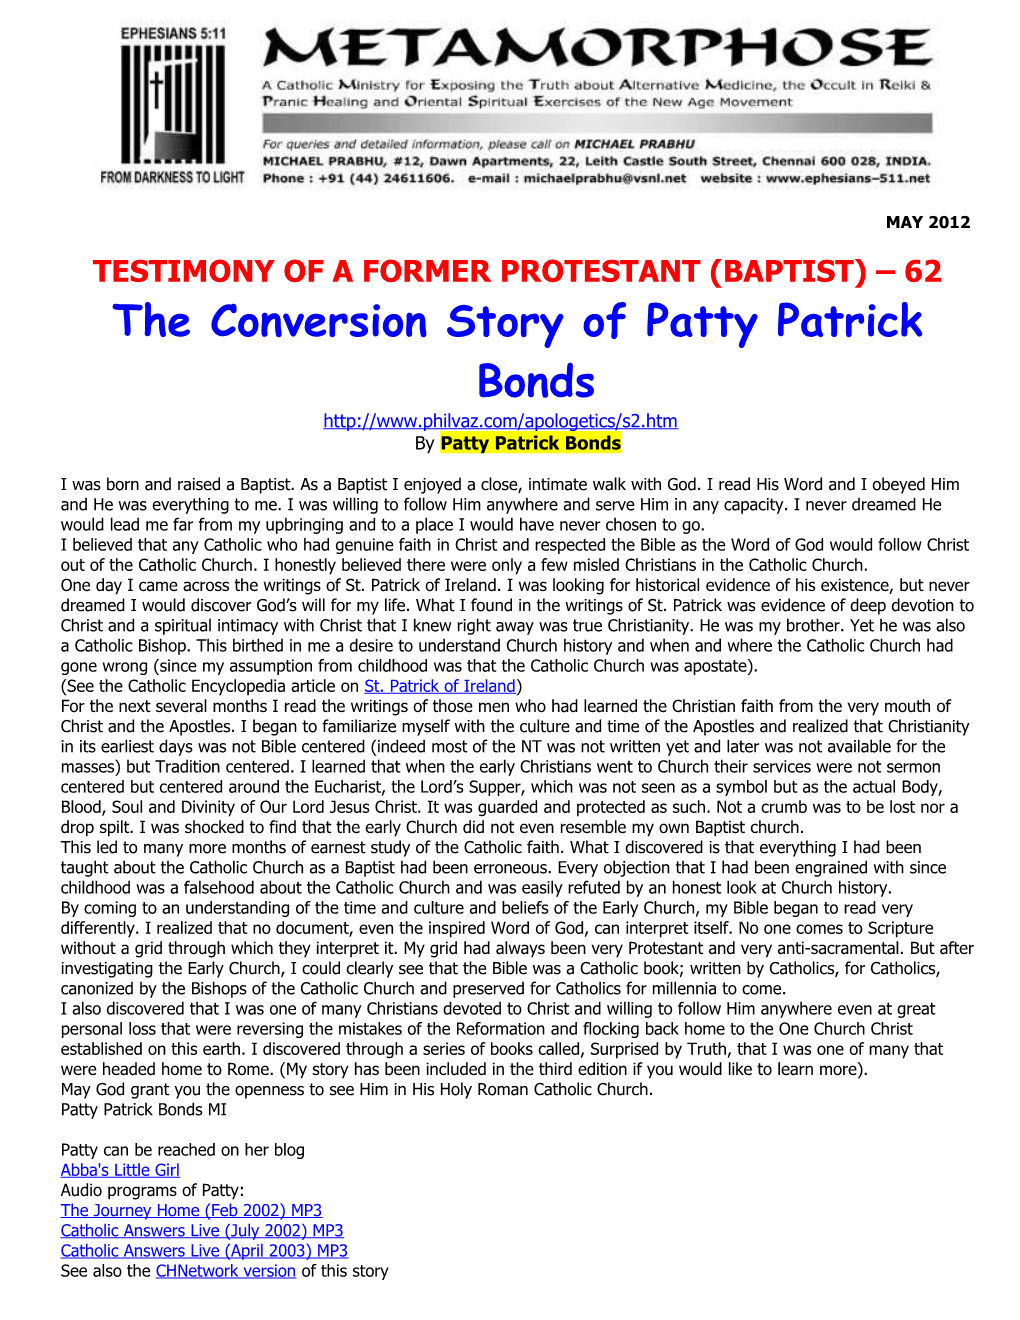 Testimony of a Former Protestant (Baptist) 62